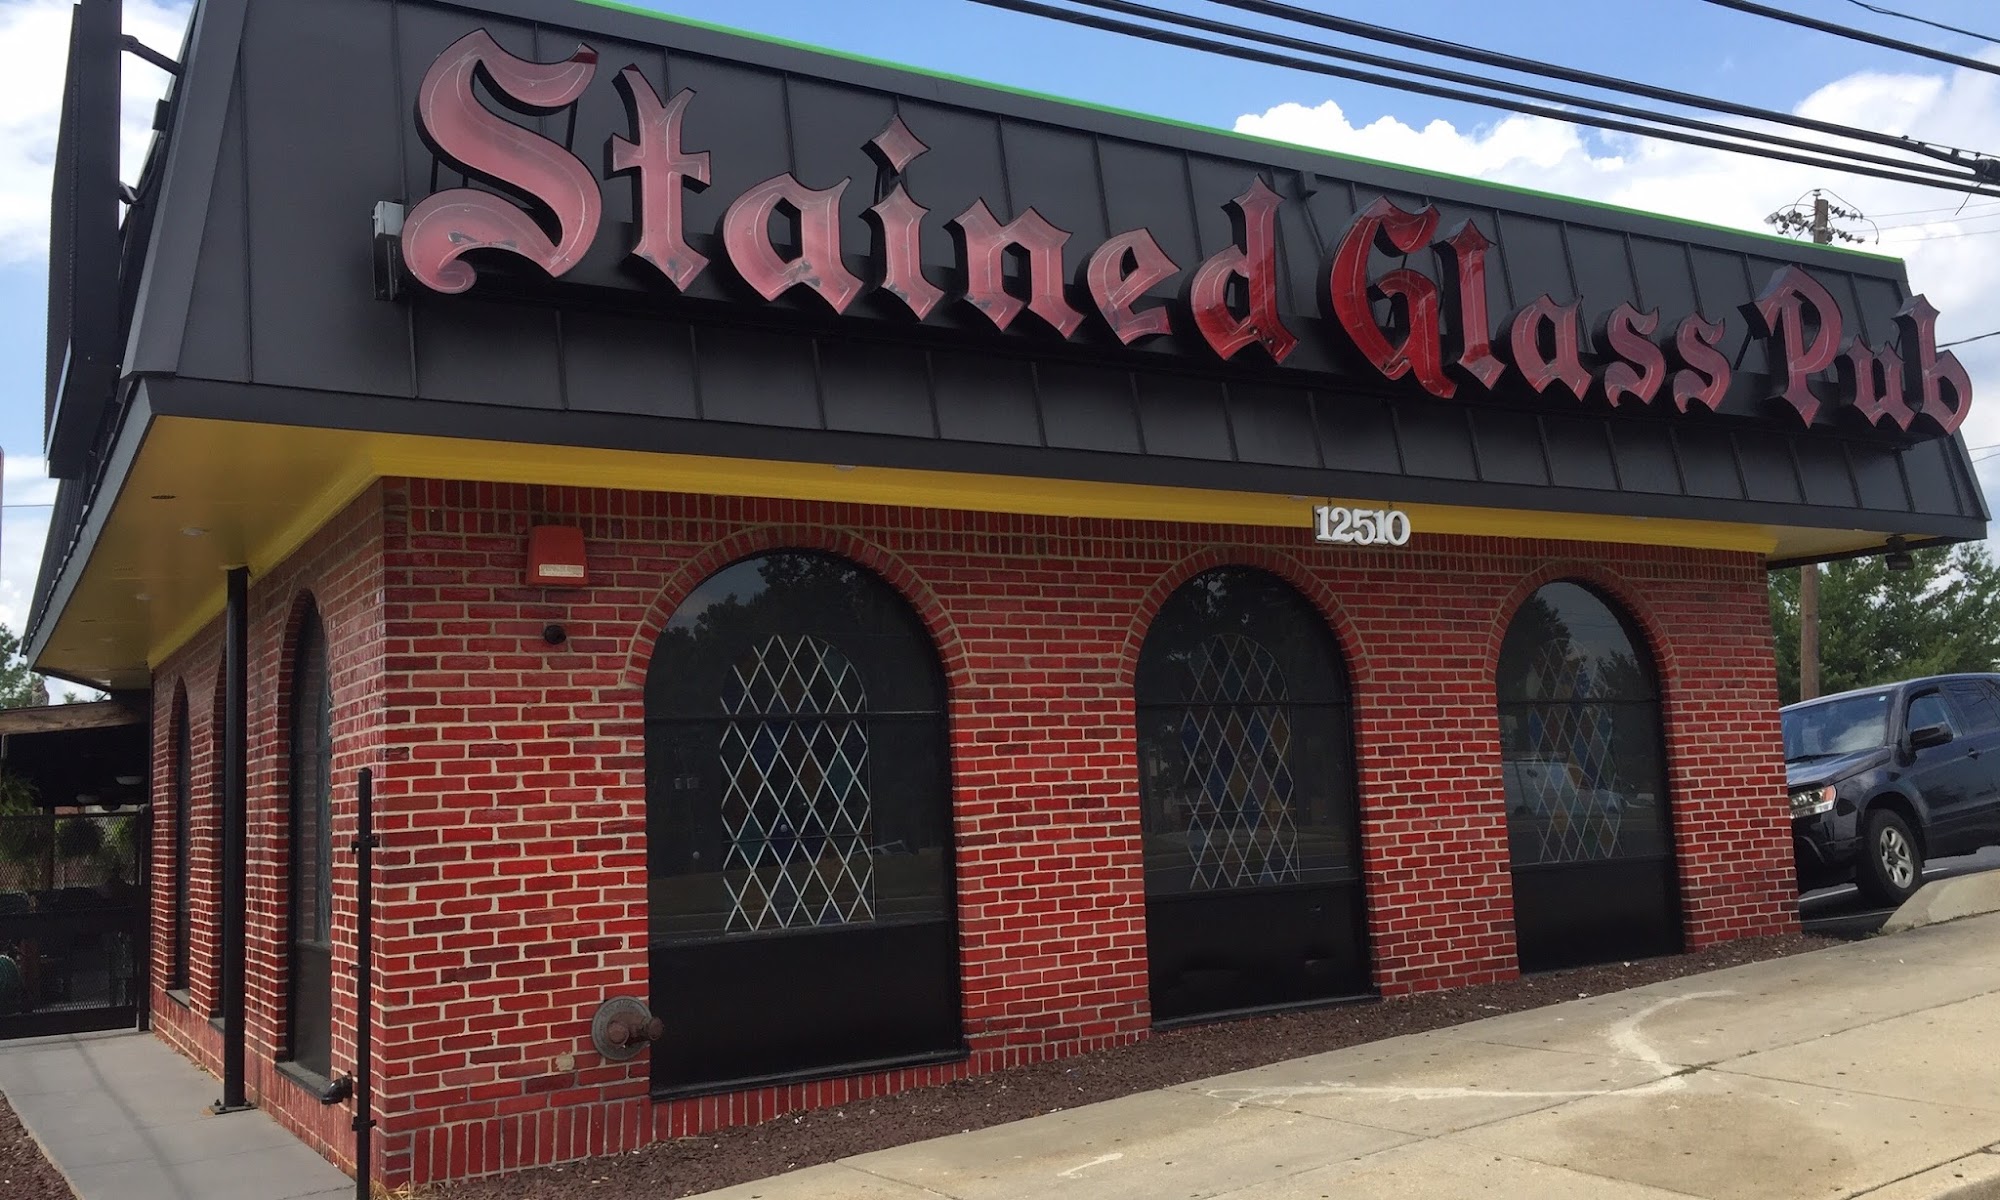 Stained Glass Pub - Glenmont